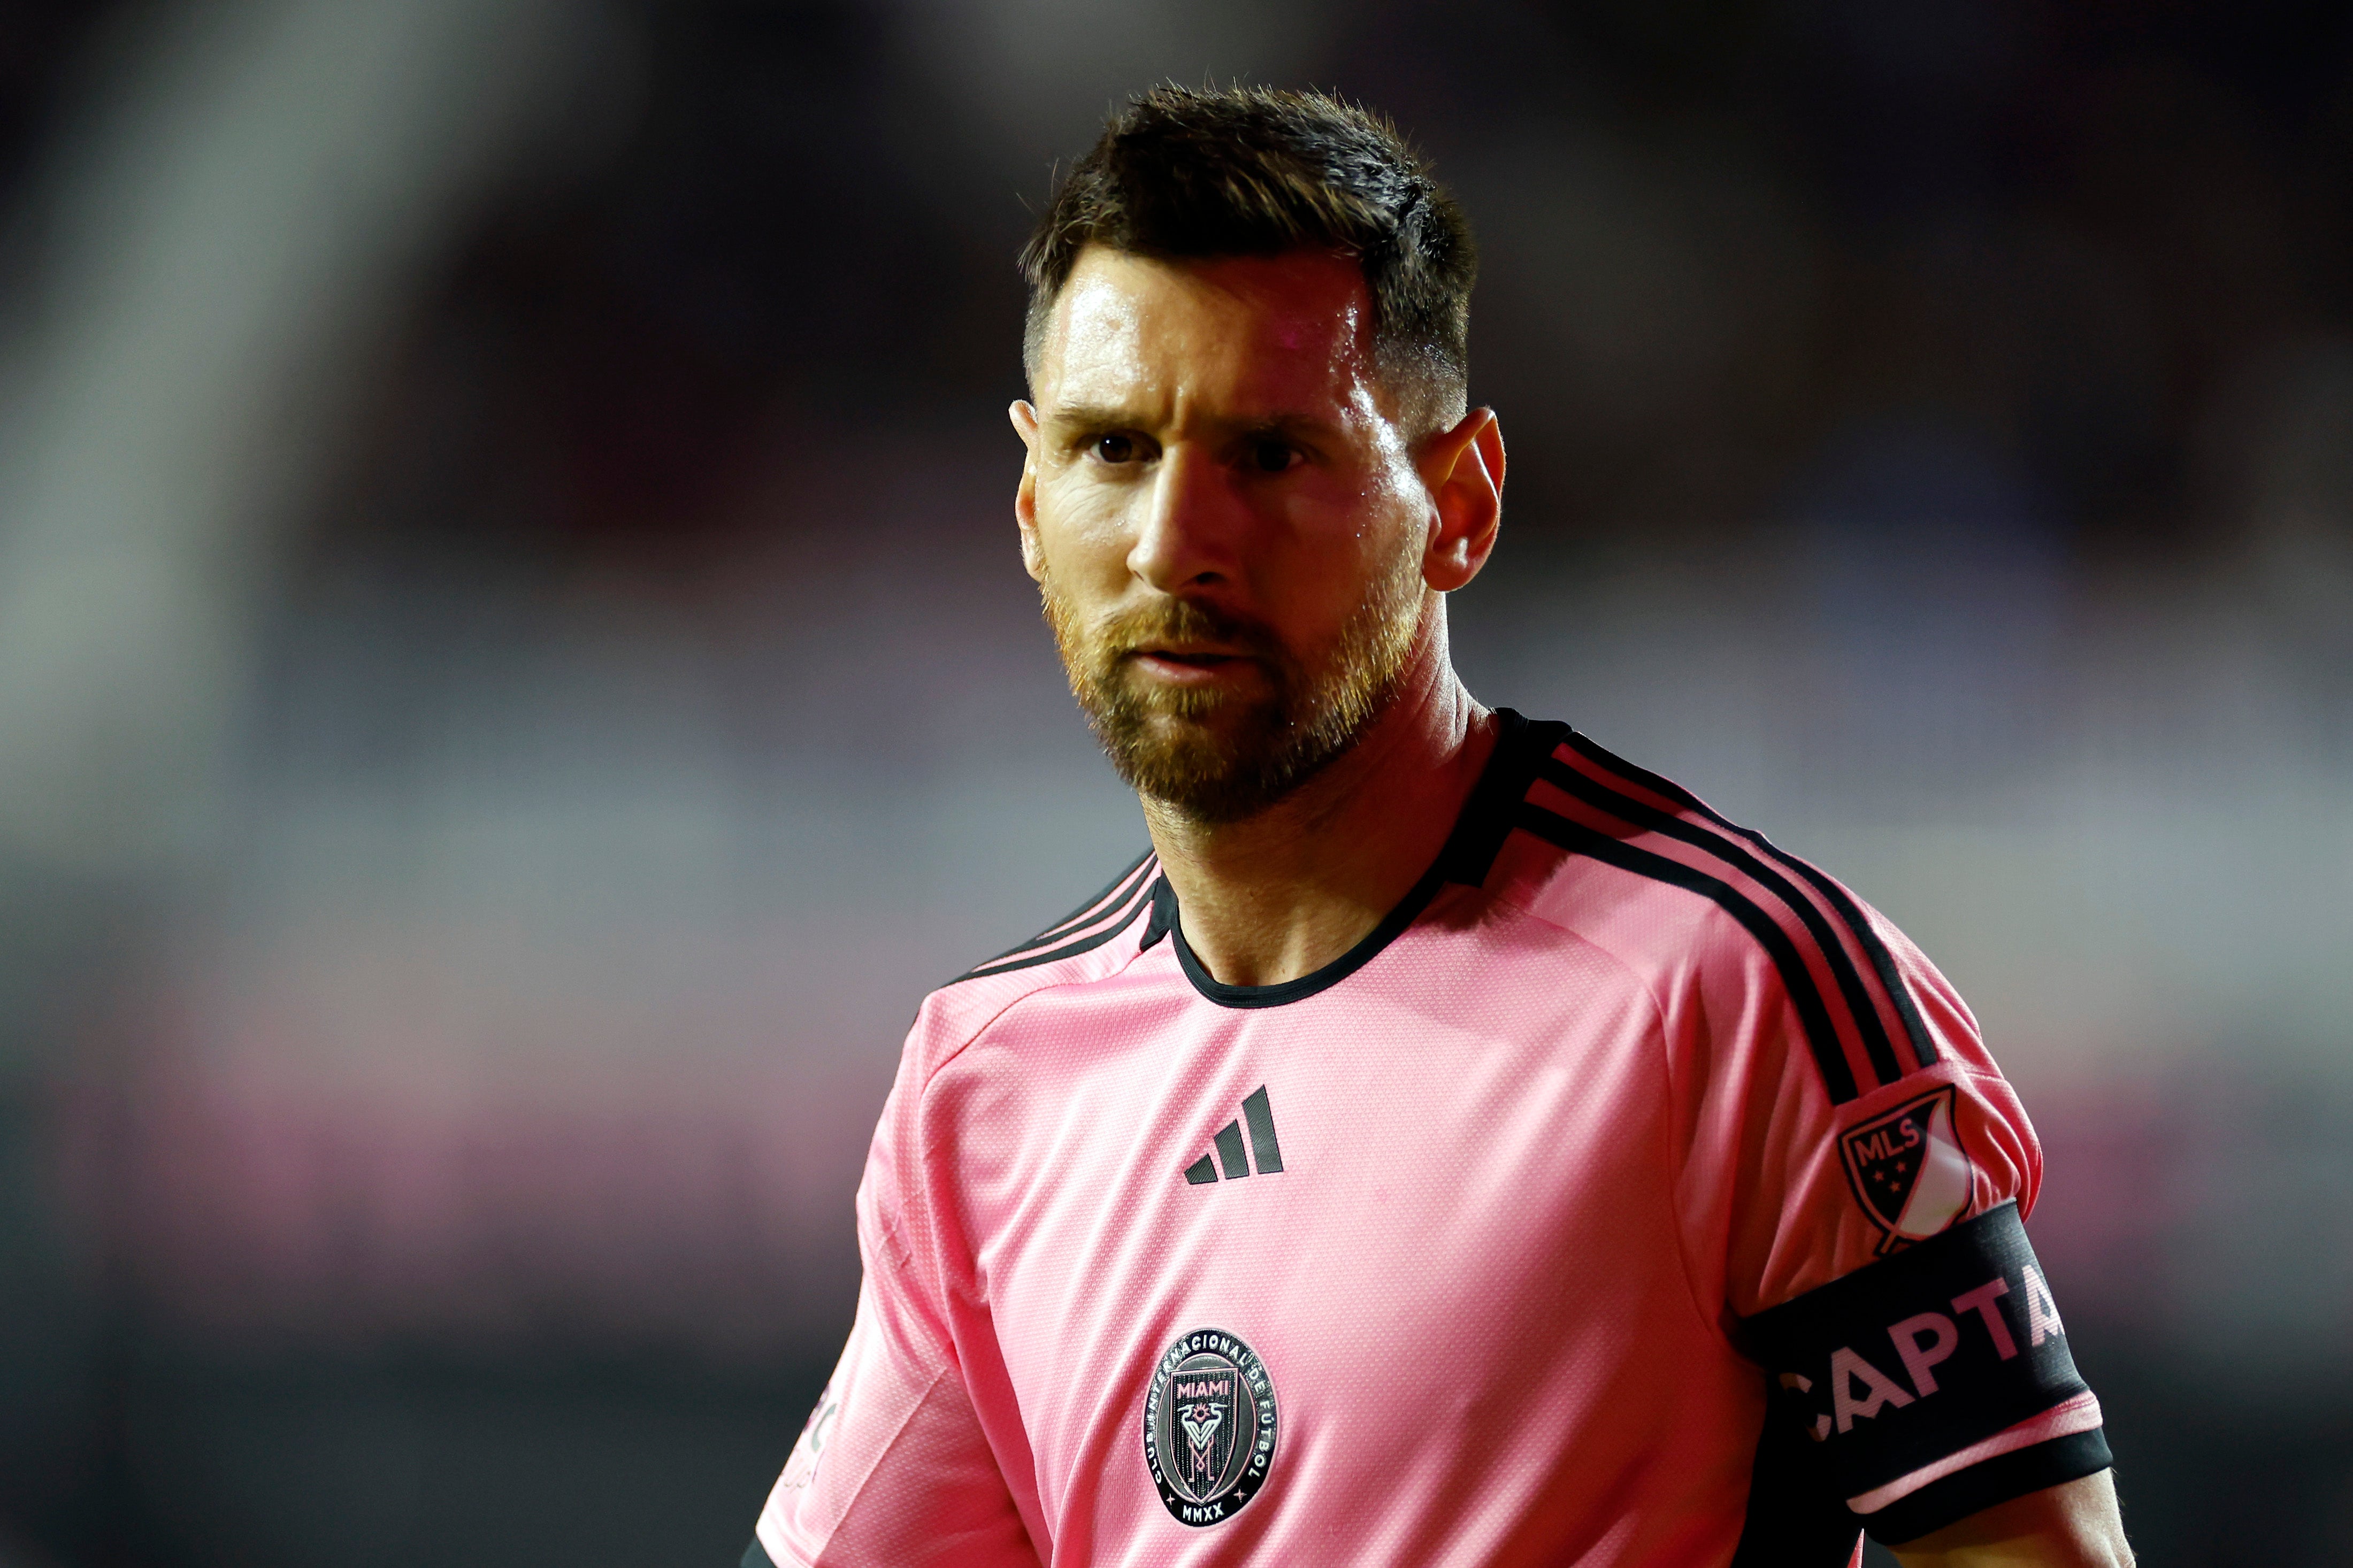 Lionel Messi will be in action again soon for Inter Miami